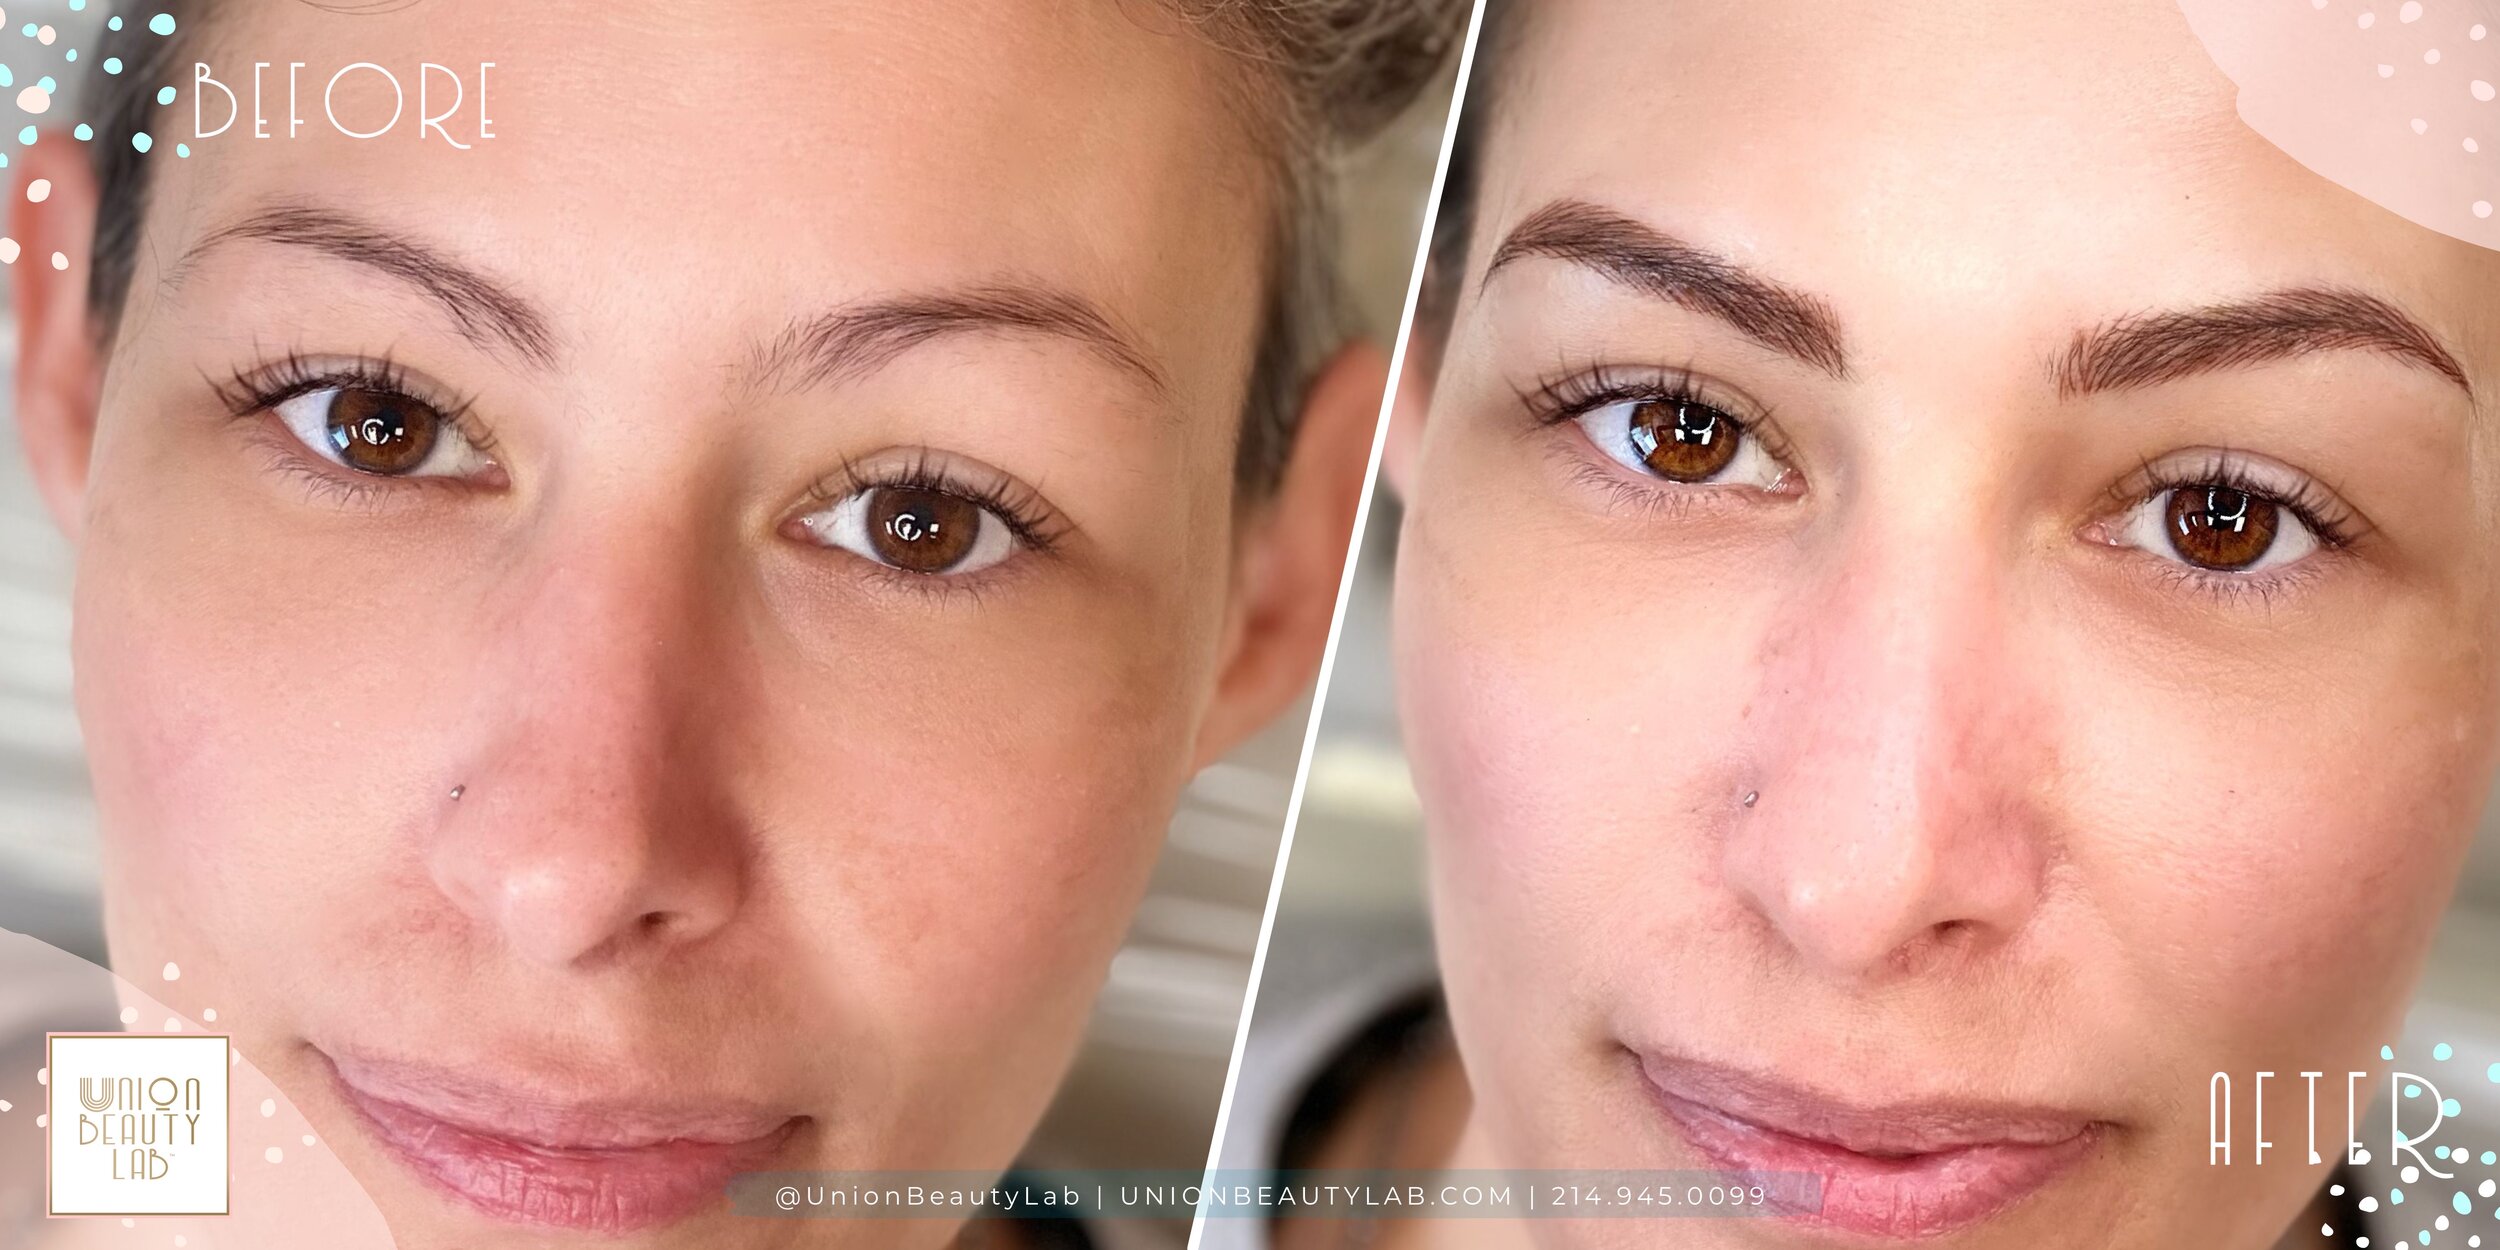 2149450099 Union Beauty Lab Advanced Microblading Cosmetic Tattooing Dallas Brunette 22.JPG